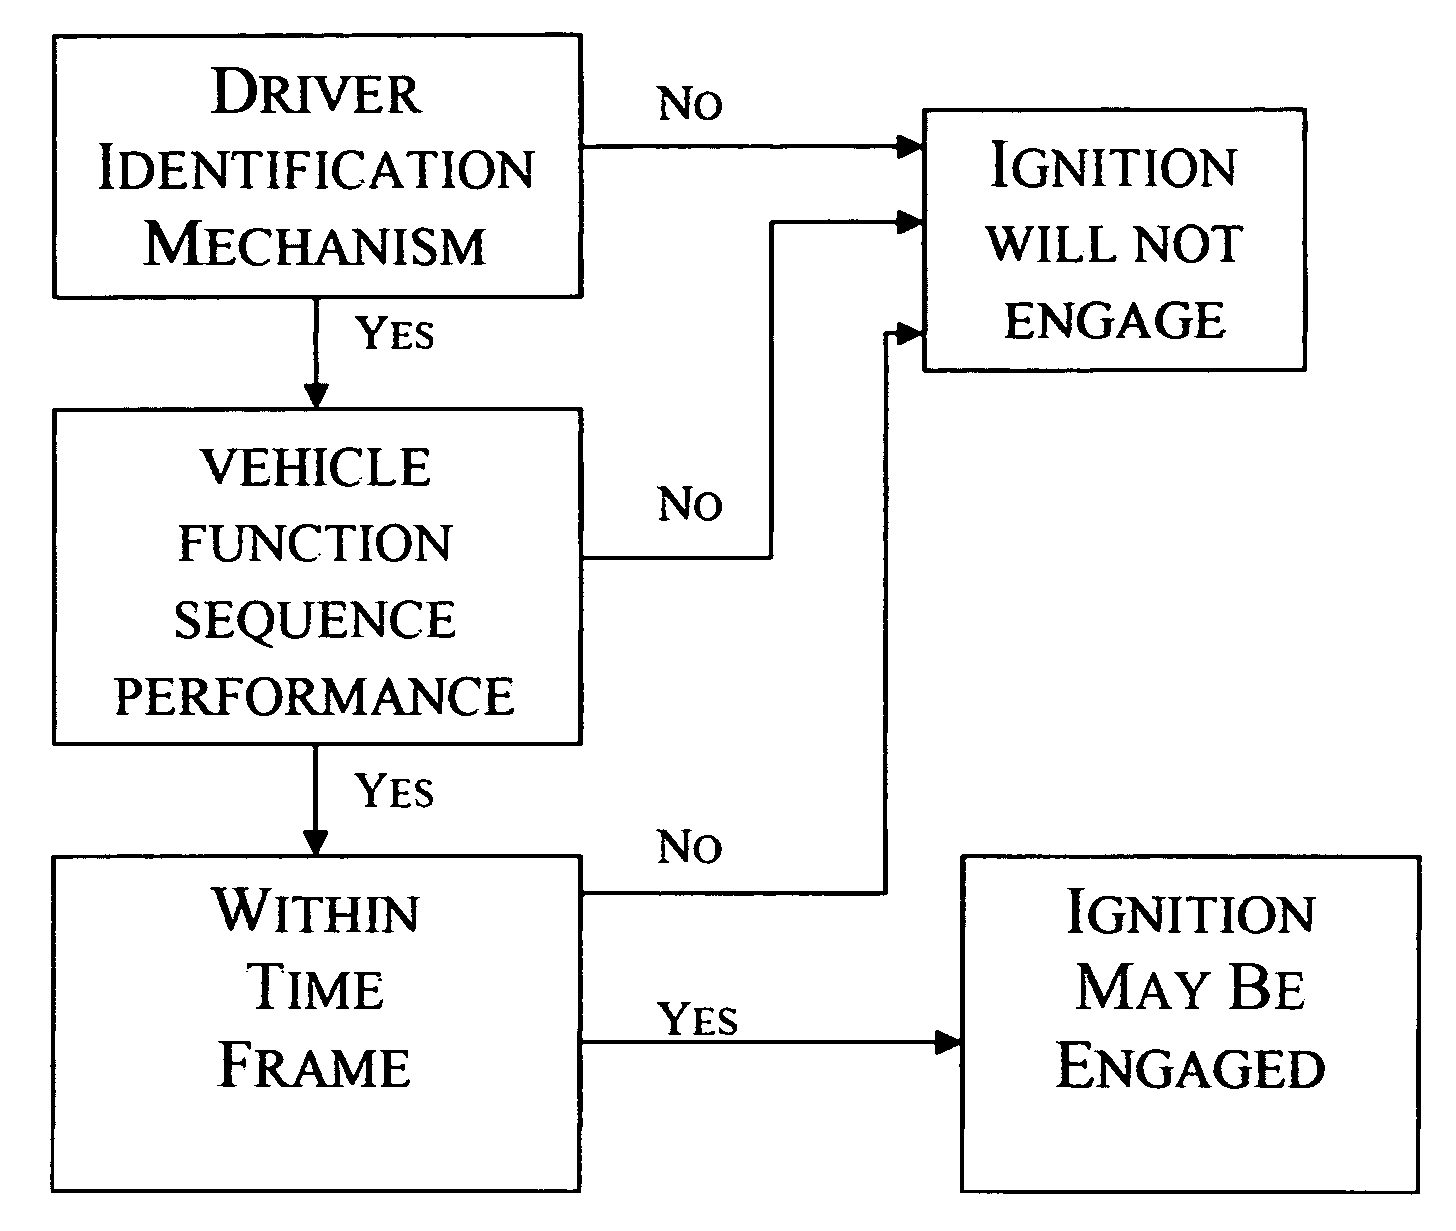 Ignition system with driver identification